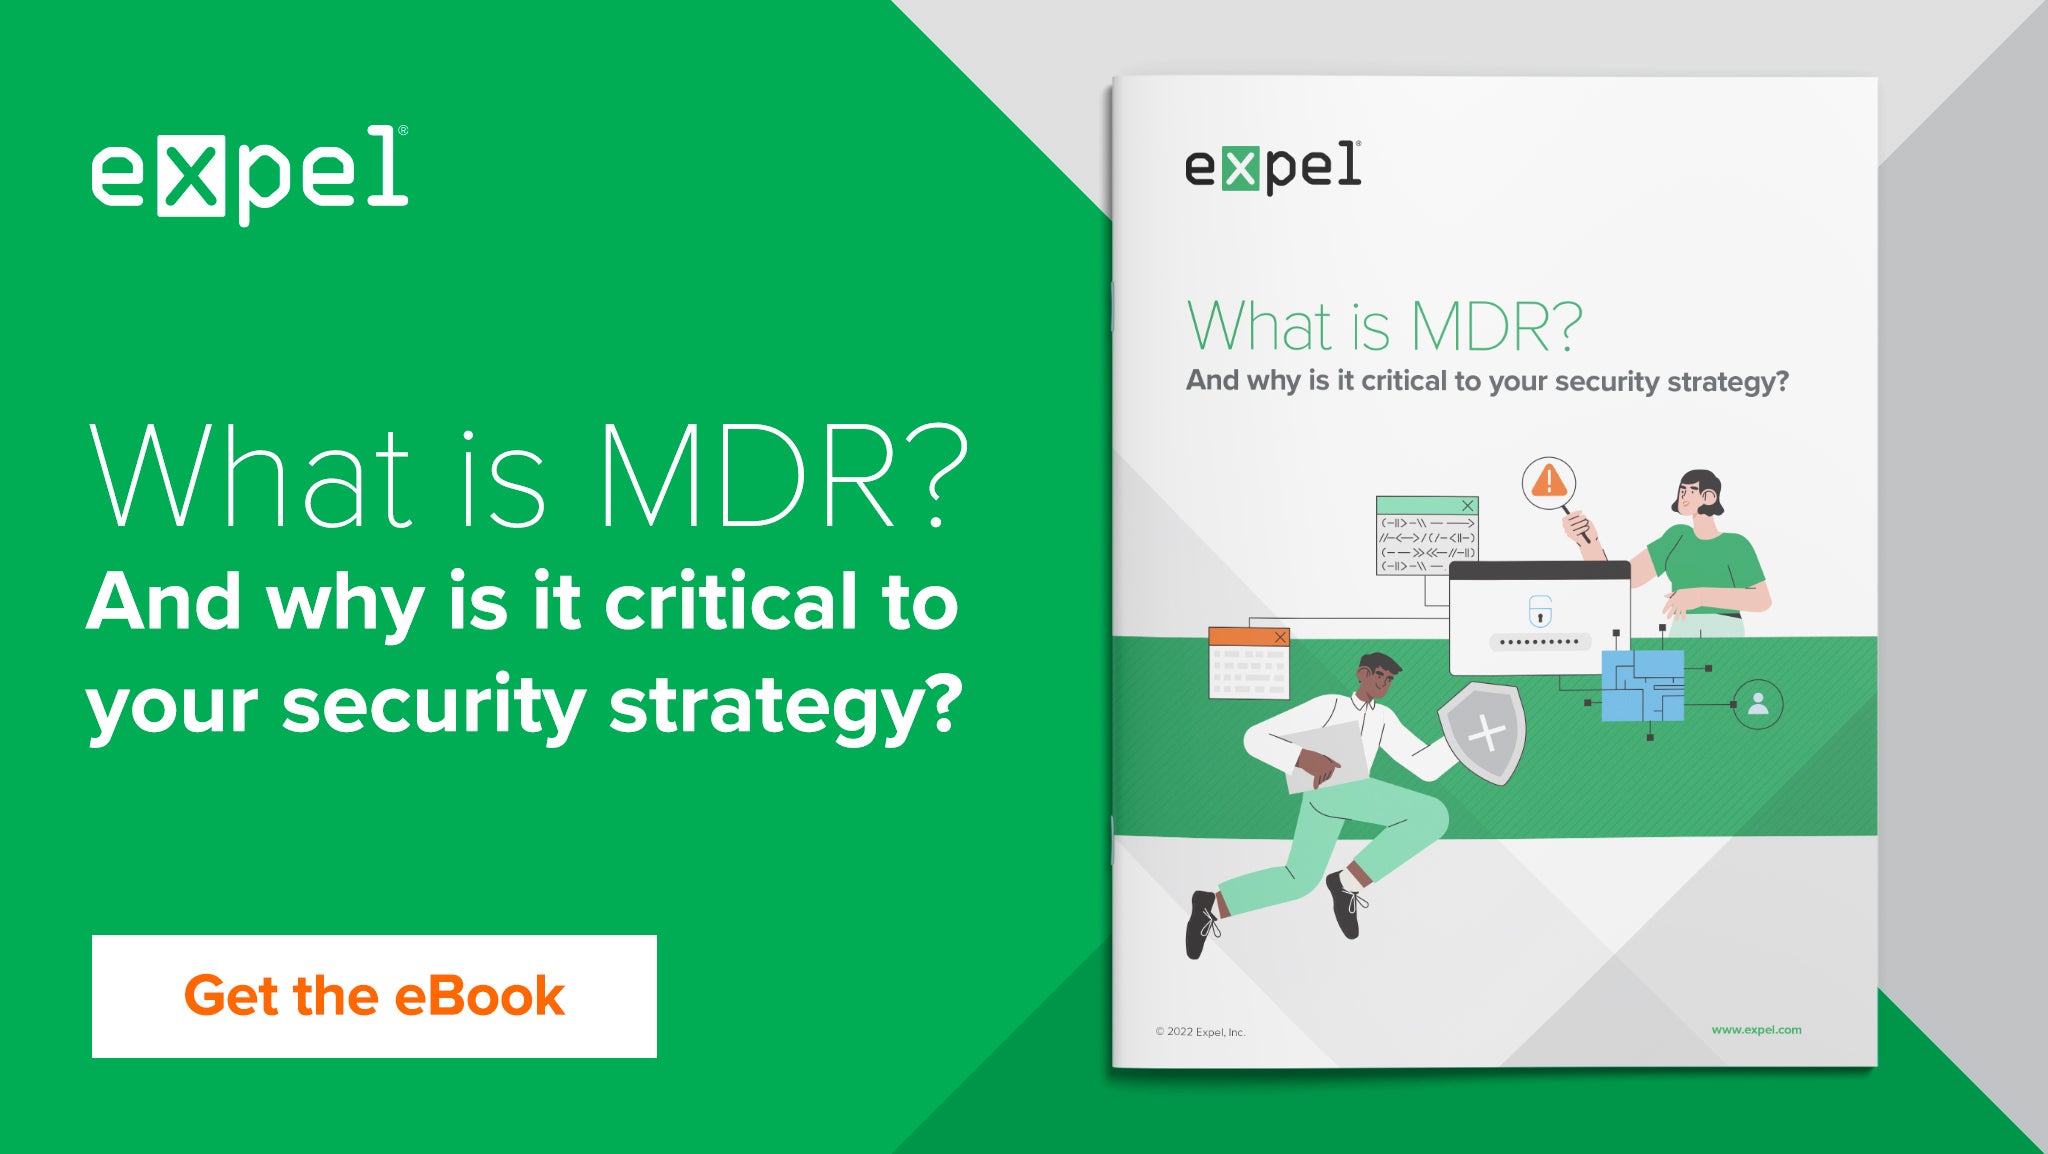 What is MDR? And why is it critical to your security strategy?